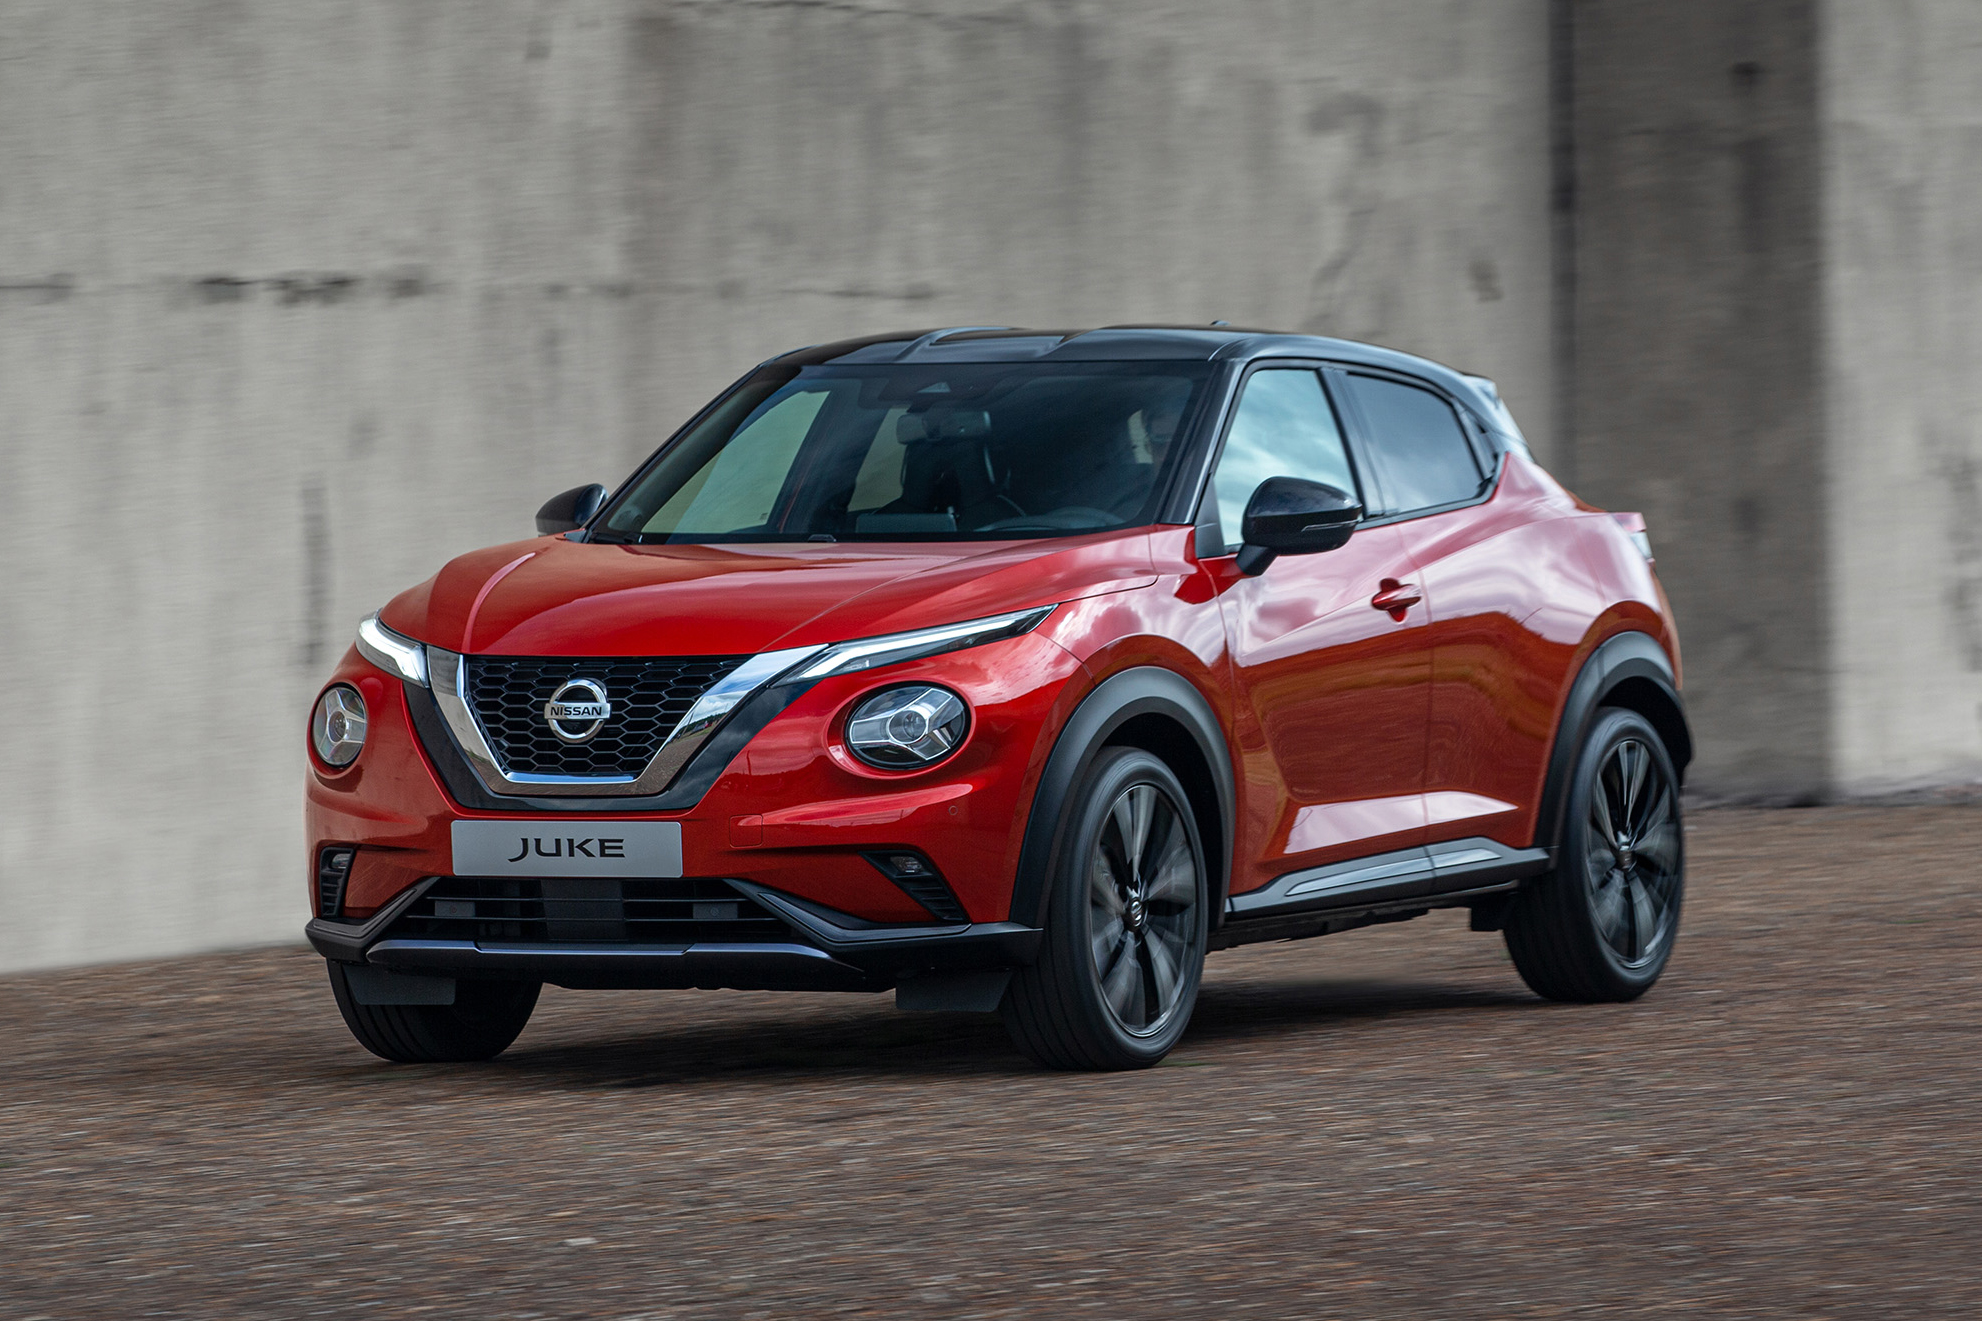 2019 Nissan Juke prices and specs confirmed Carbuyer